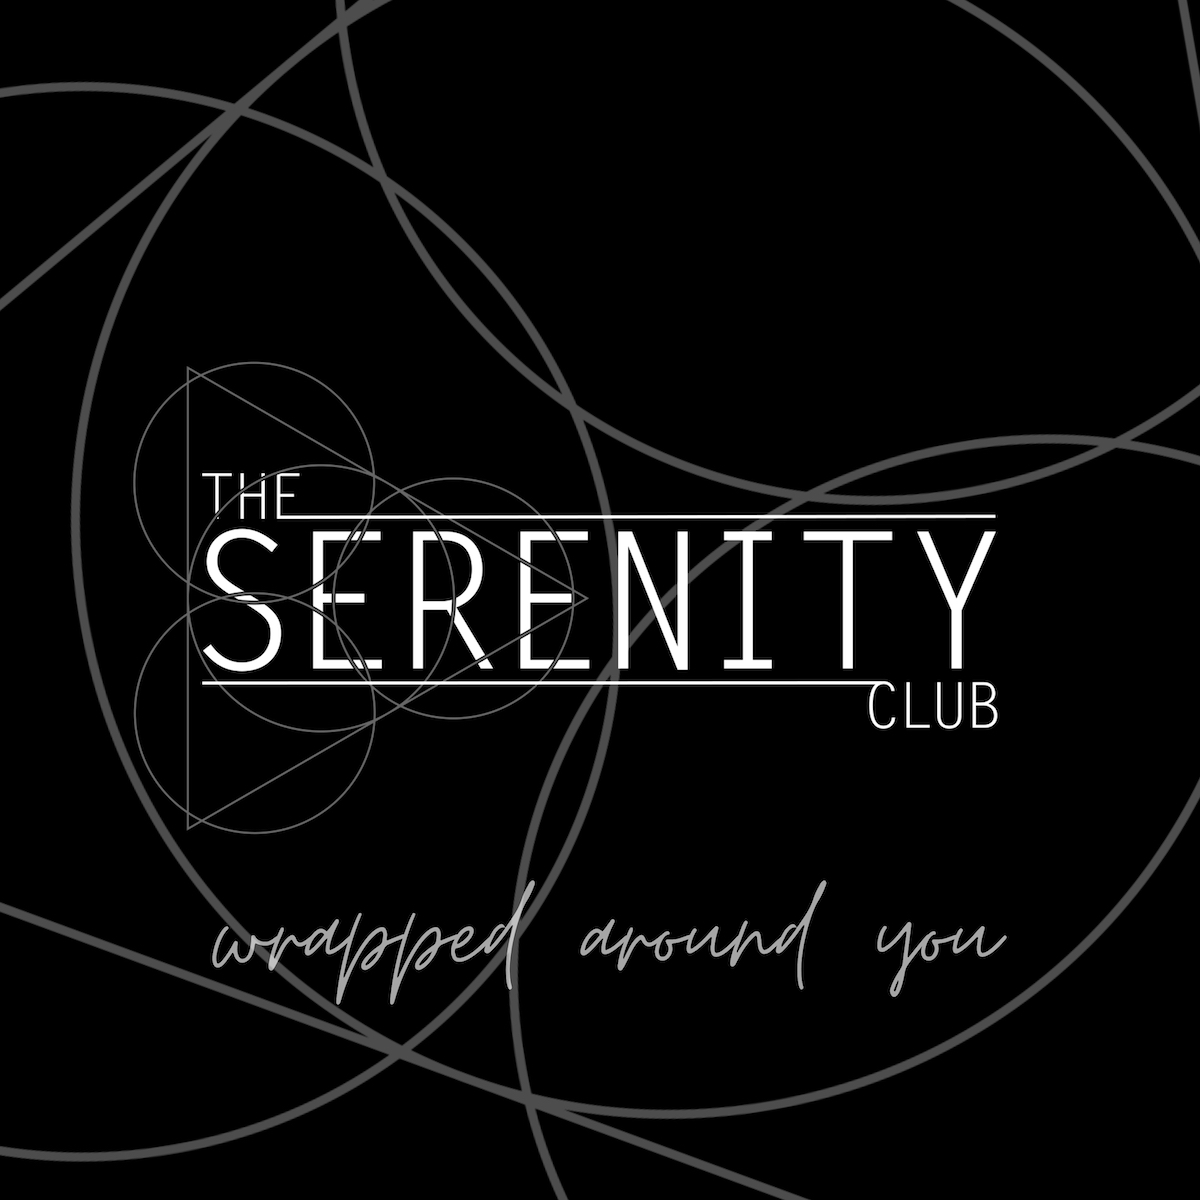 LISTEN: “Wrapped Around You” by The Serenity Club